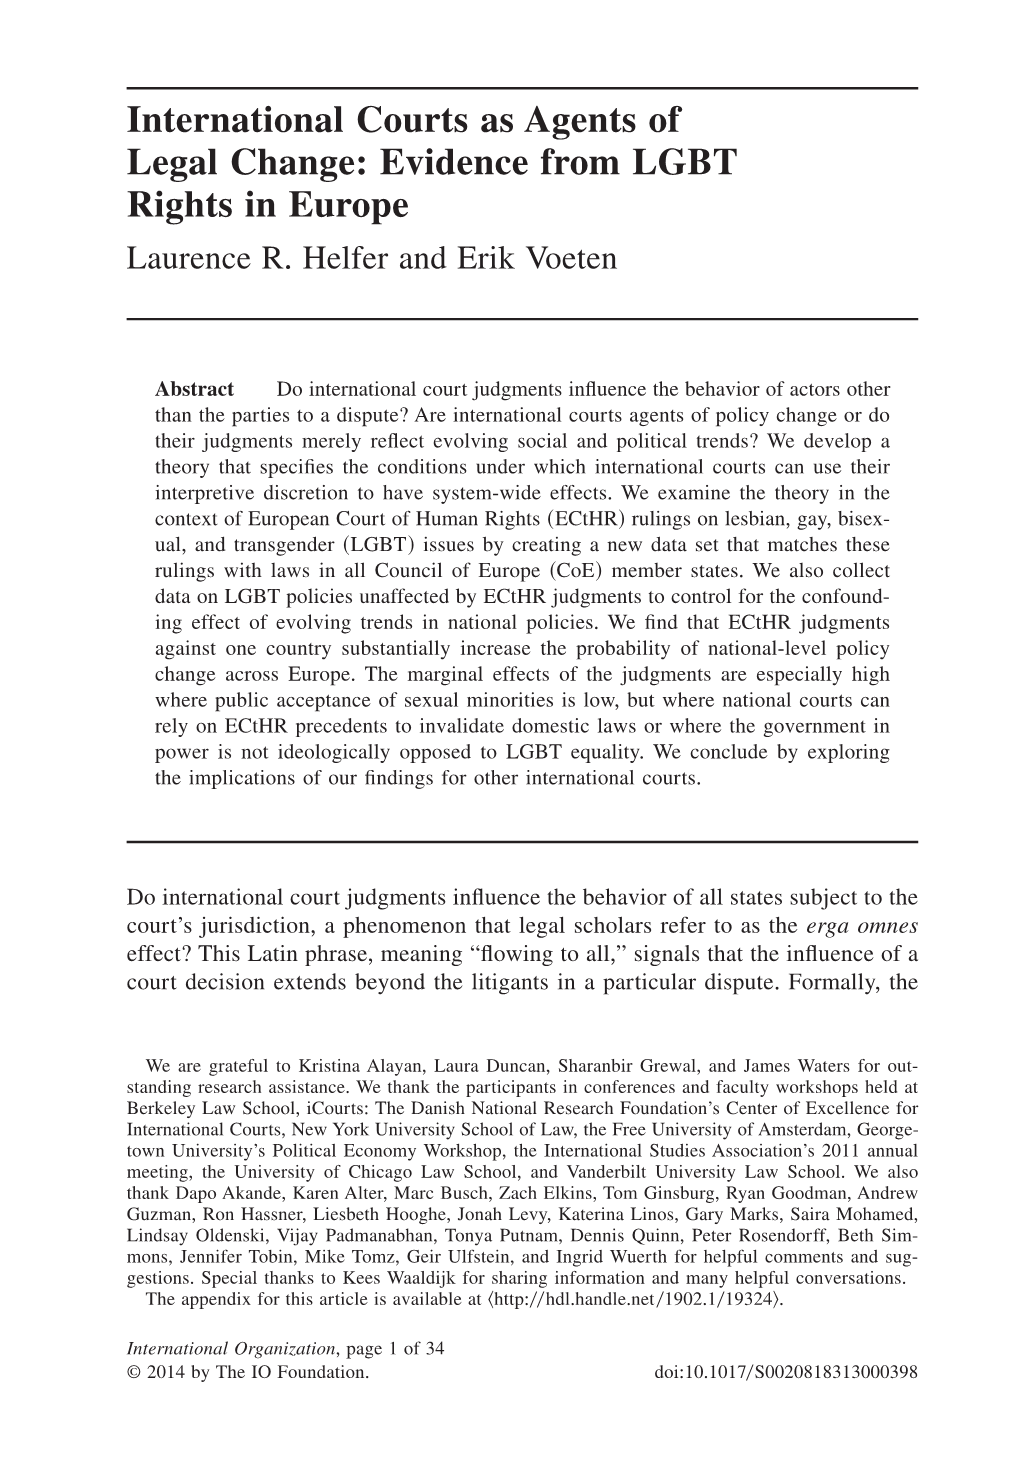 International Courts As Agents of Legal Change: Evidence from LGBT Rights in Europe Laurence R+ Helfer and Erik Voeten